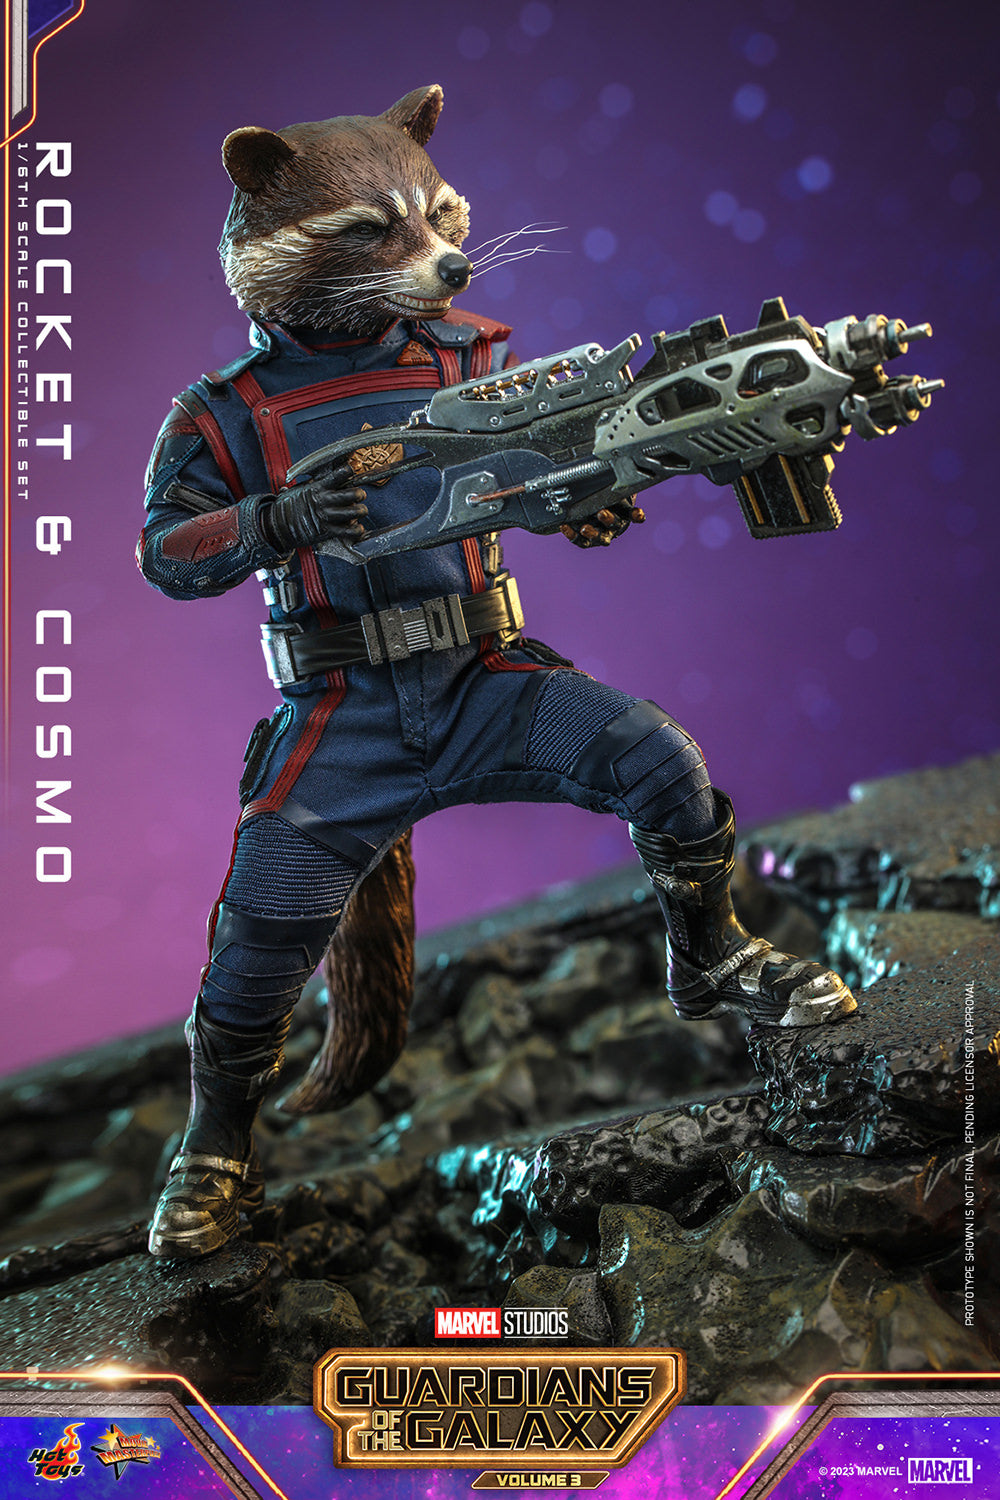 PRE-ORDER Rocket and Cosmo Sixth Scale Figure Set